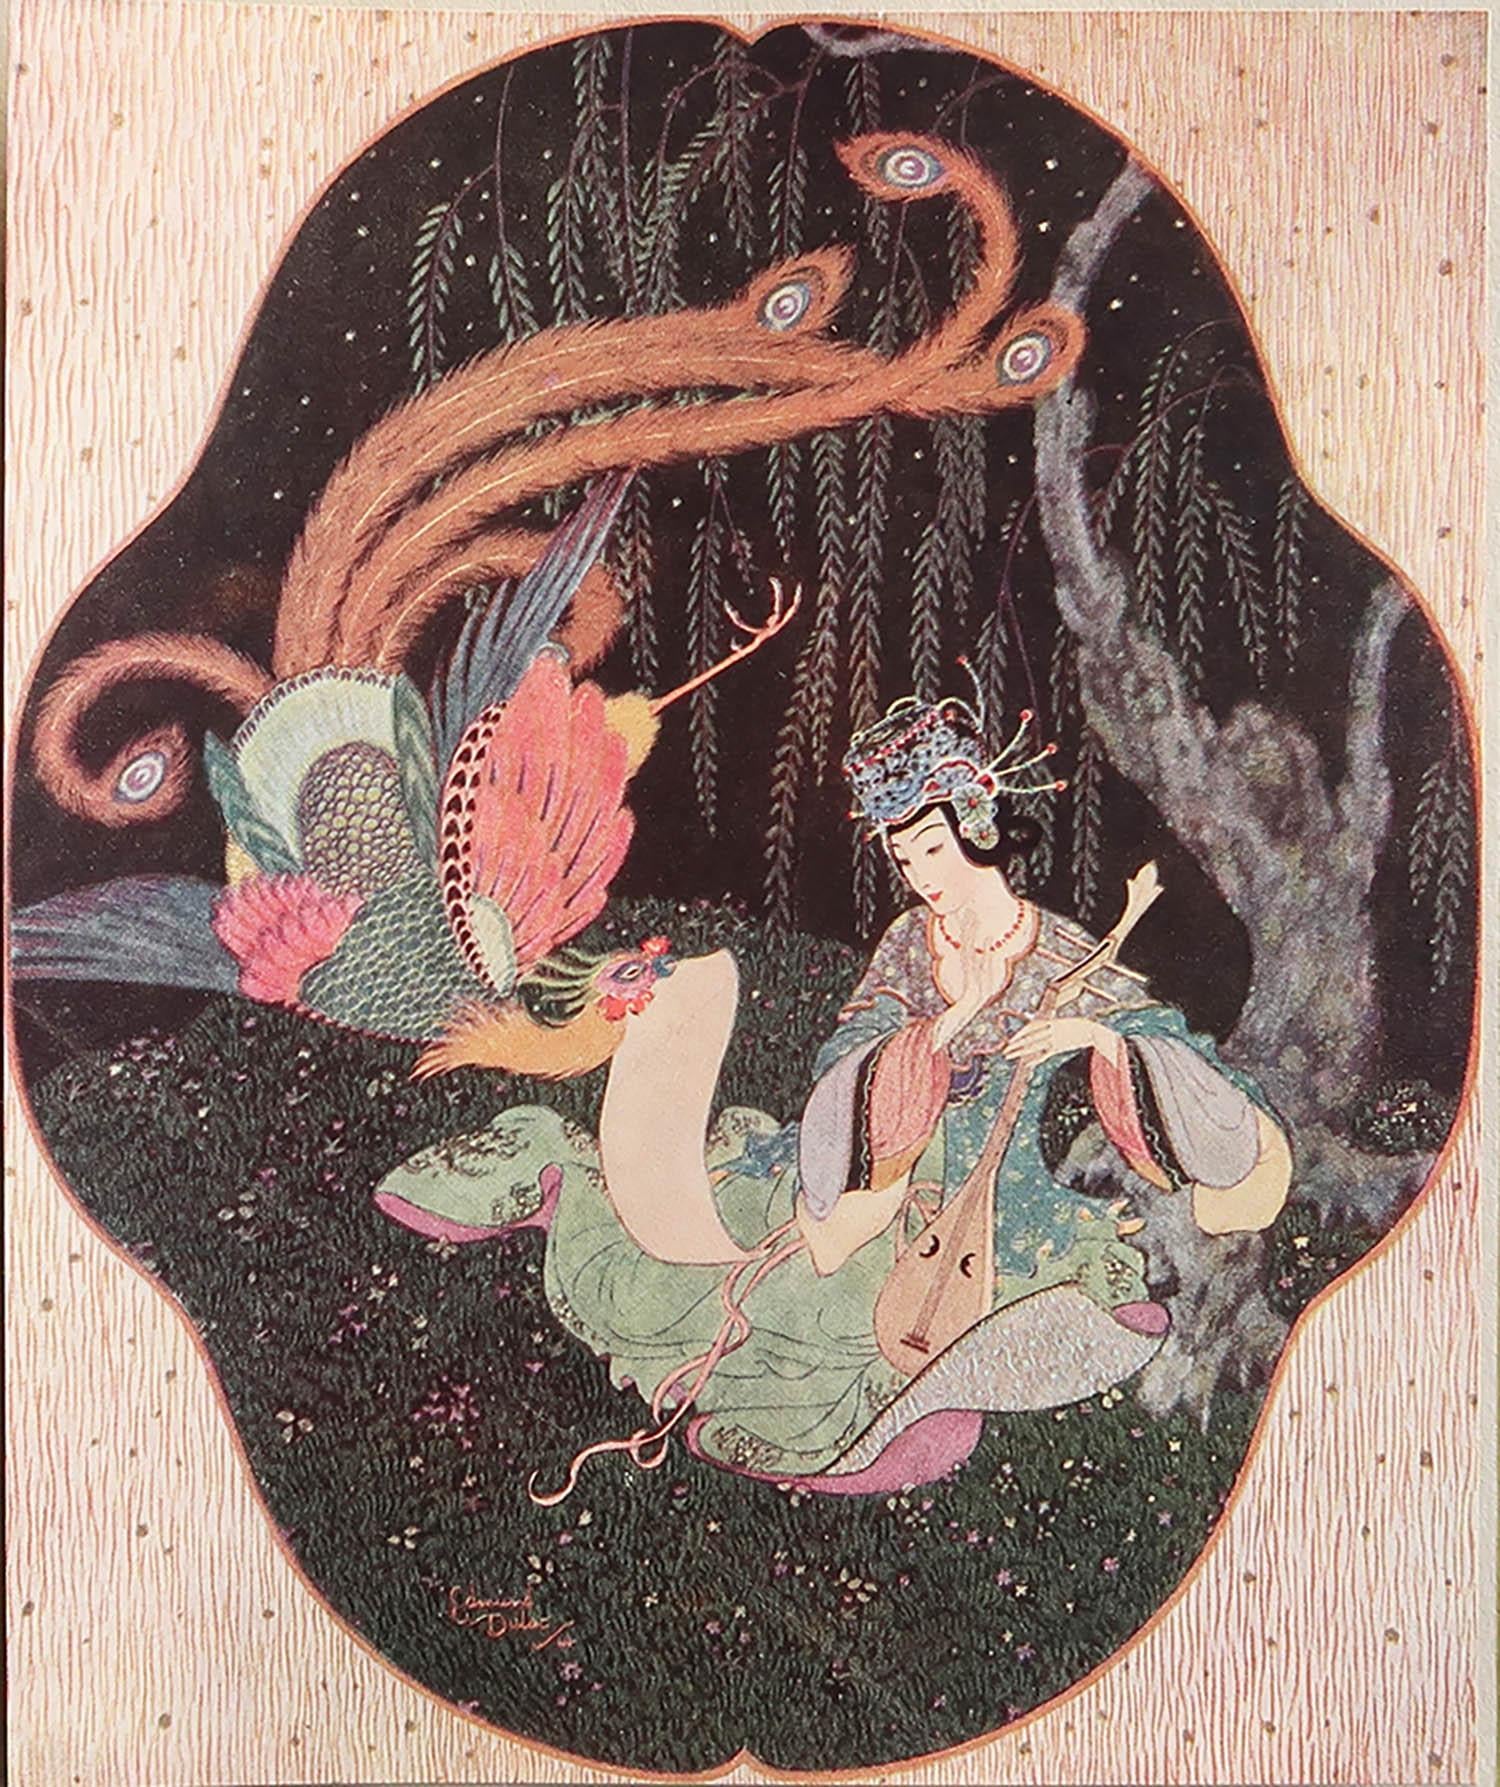 Lovely image by Edmund Dulac

Tipped in plate.

Lithograph. 

Published circa 1930

The measurement given is the card size not the actual printed image.

